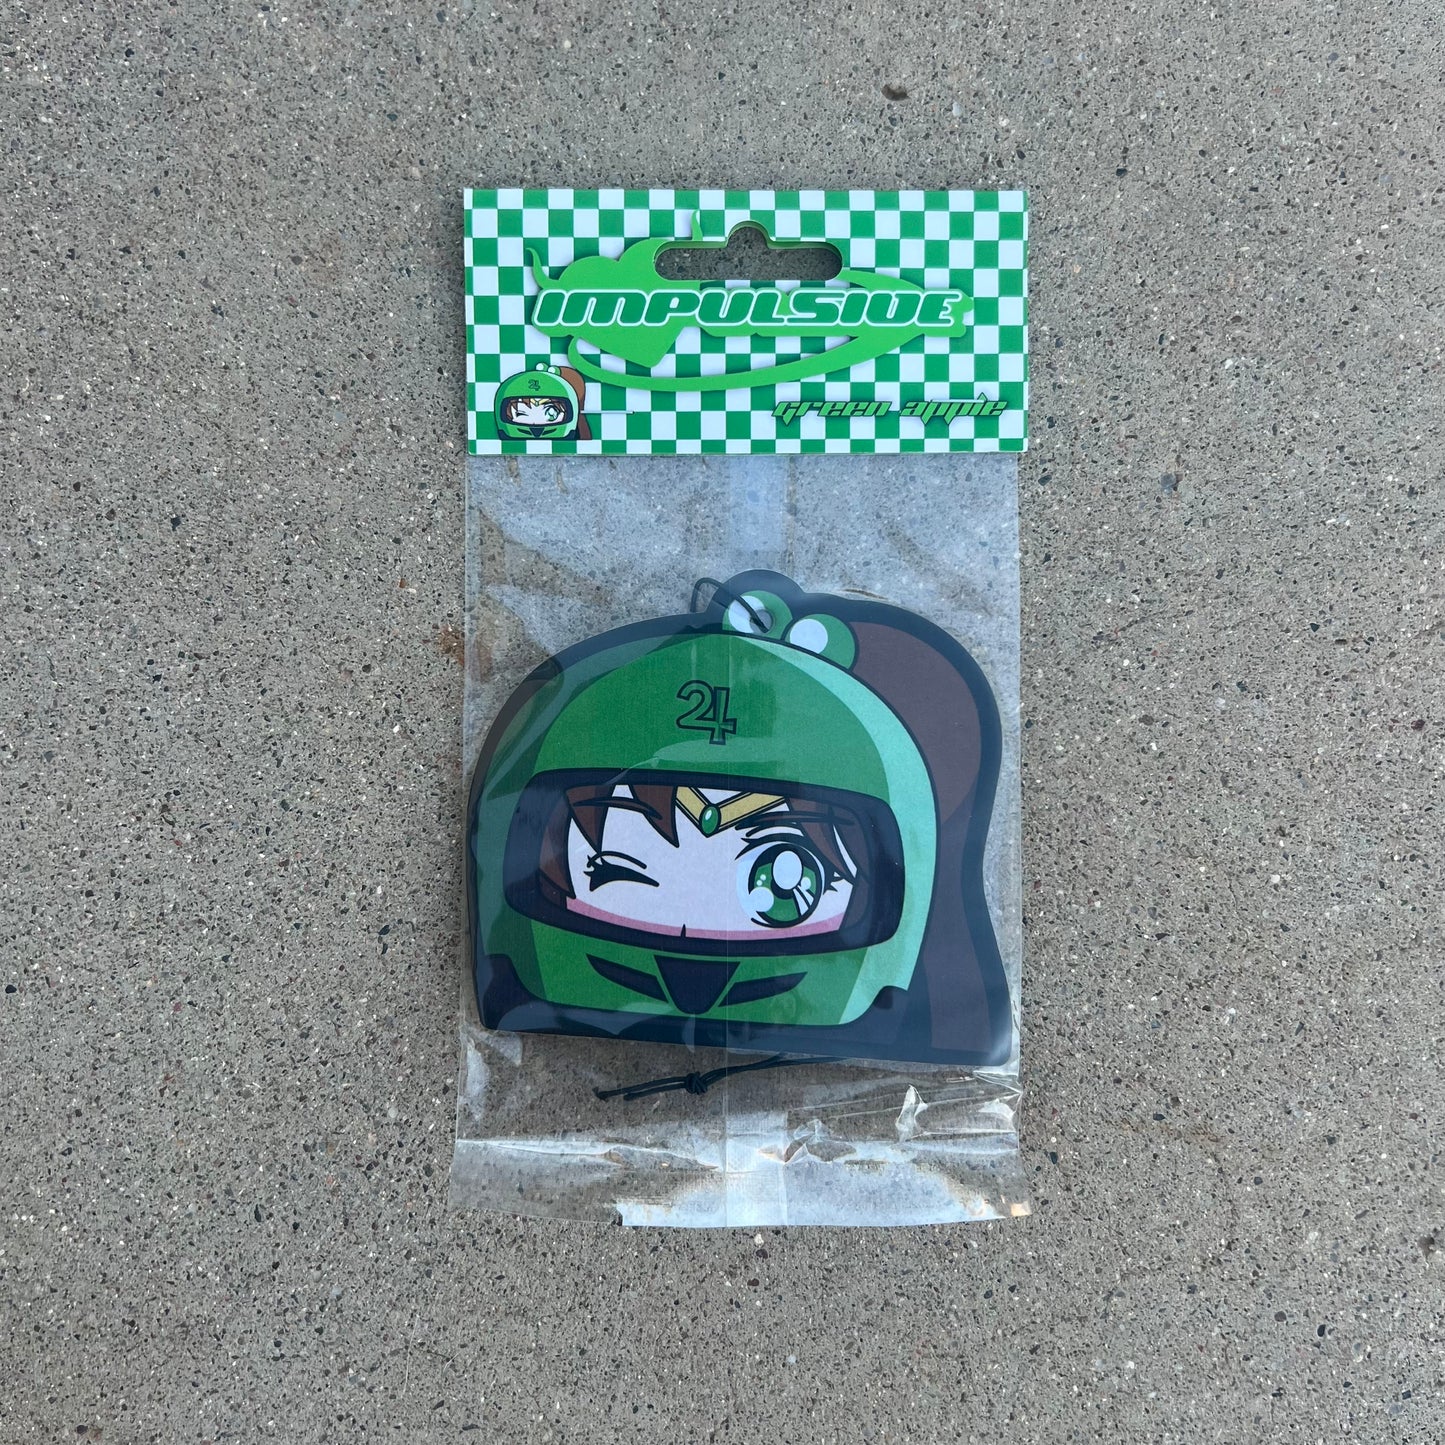 Anime Jupiter air freshener hanging from black string. Green helmet with brown hair pony tail anime japanese girl character with green eyes. Green checkered background with y2k impulsive logo and green apple scent logo cardboard head card packaging. 